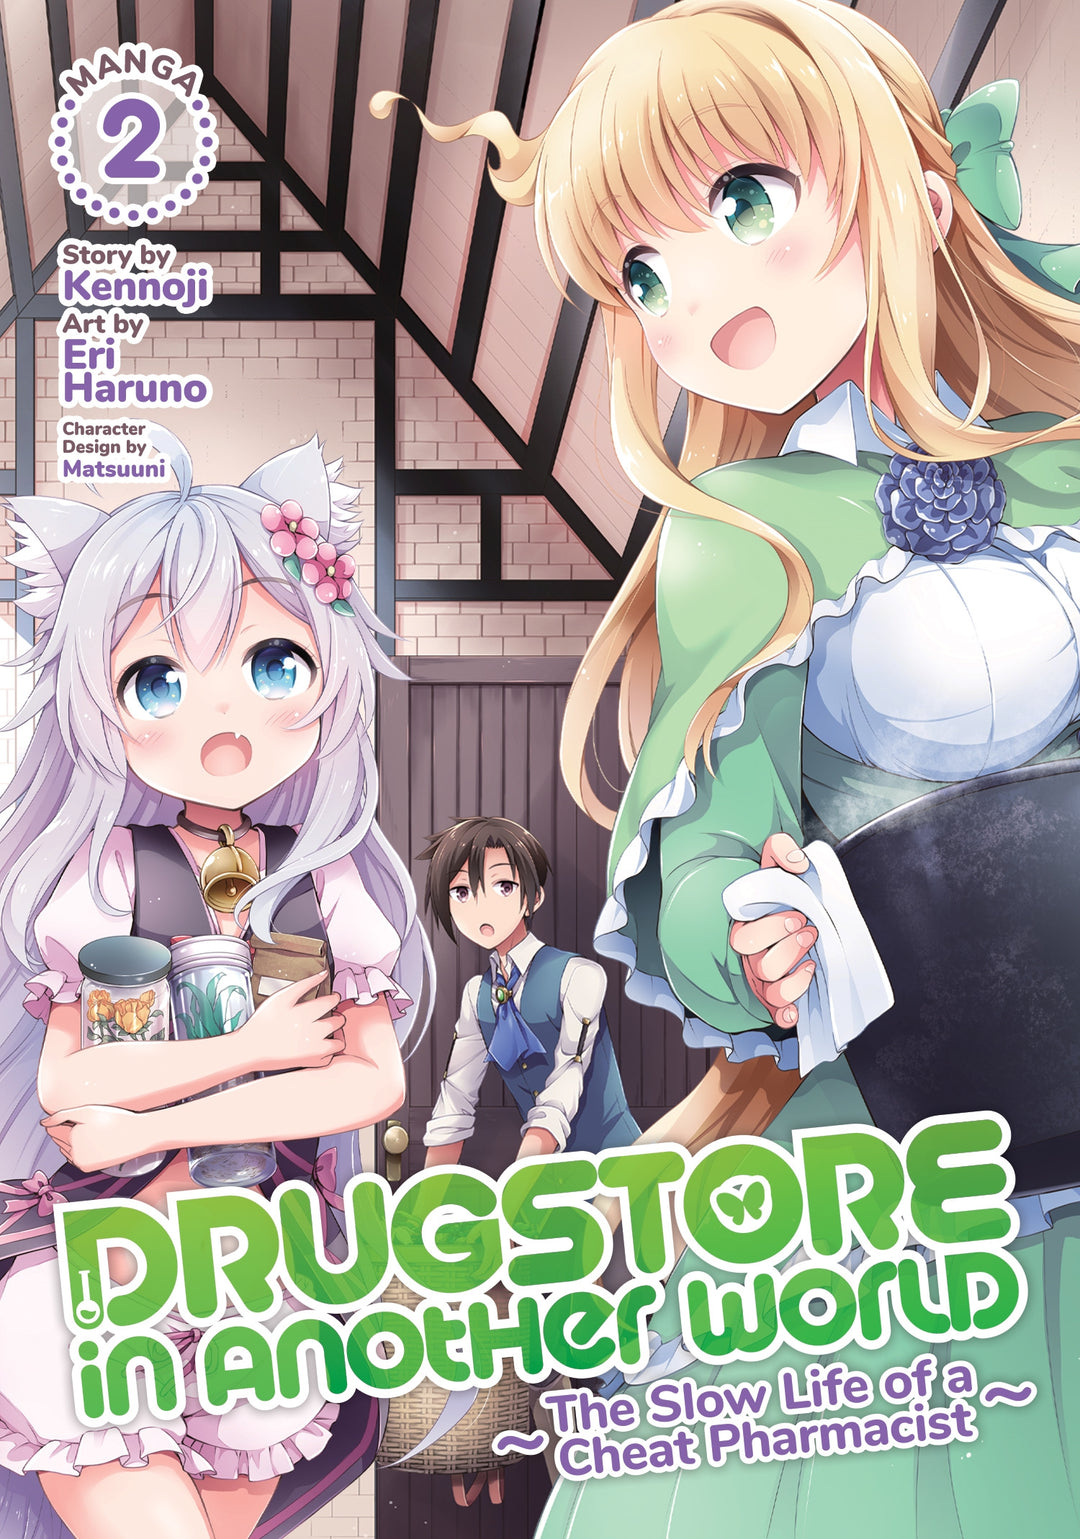 Drugstore in Another World: The Slow Life of a Cheat Pharmacist (Manga) Vol. 02